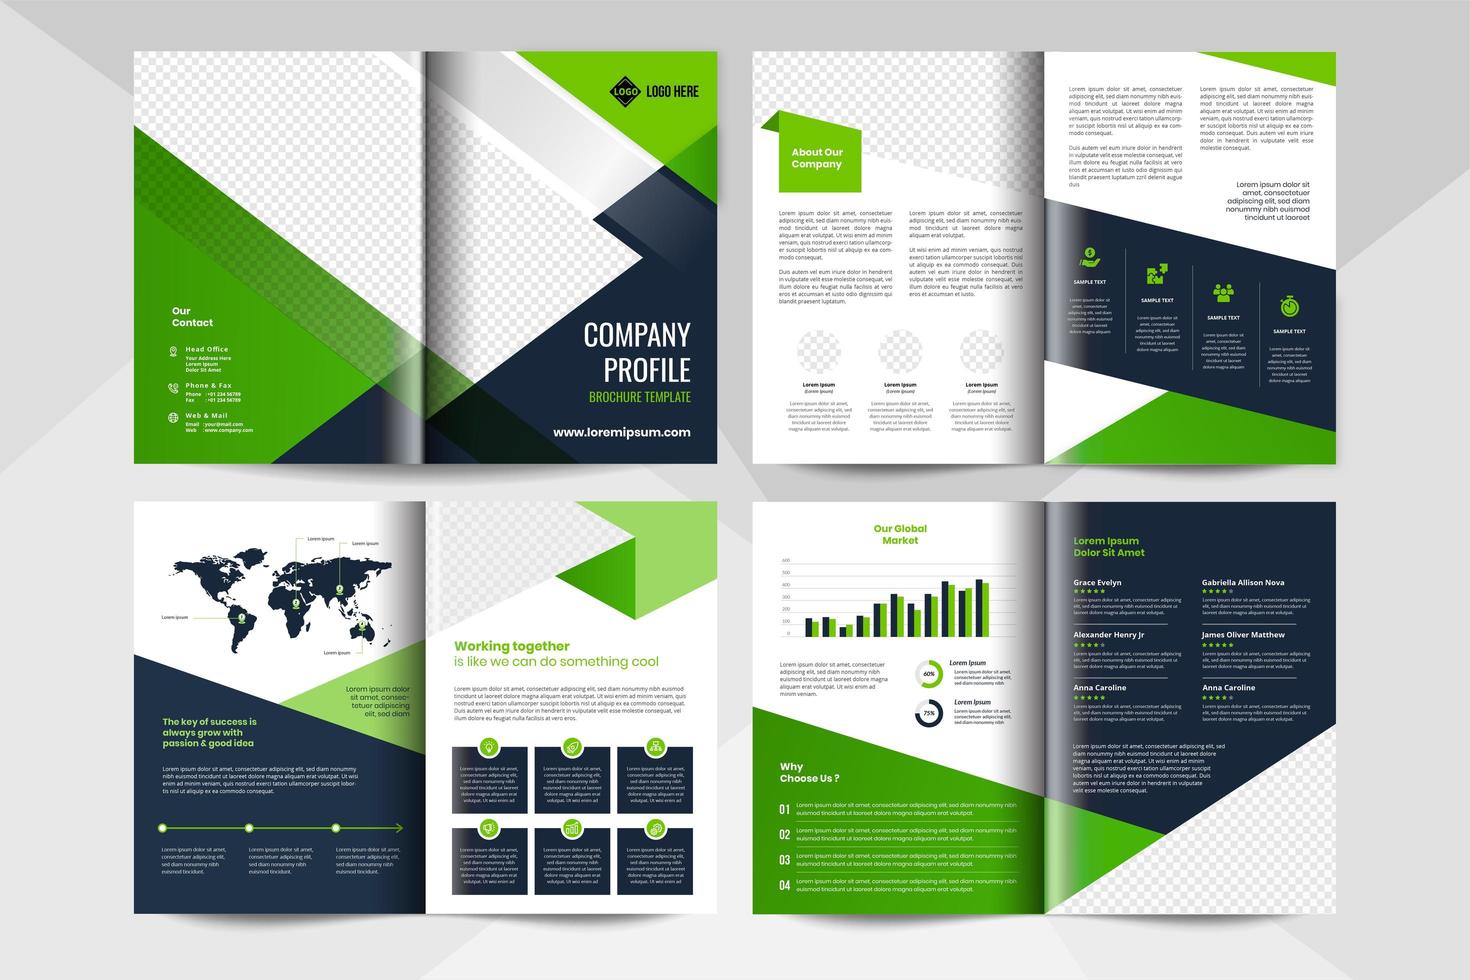 8 page corporate business brochure template. Corporate business flyer template. vector